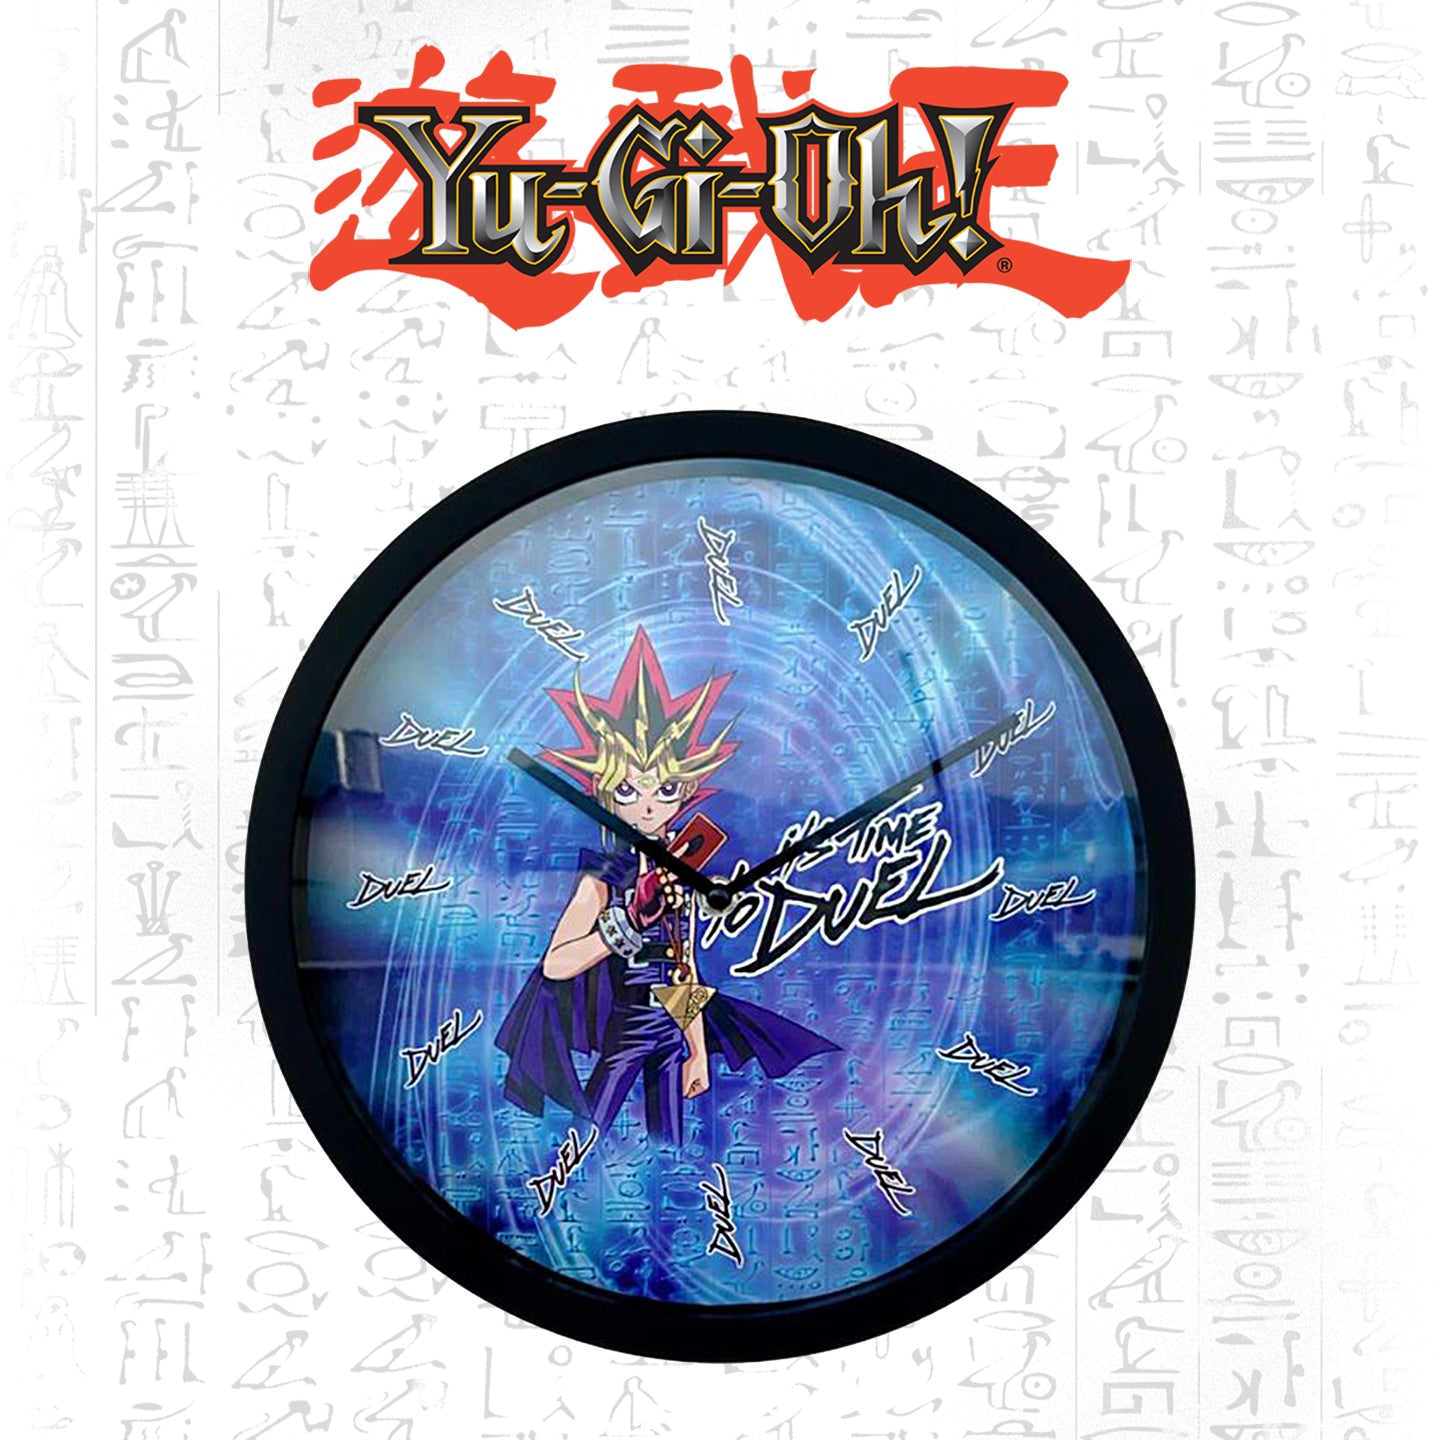 Yu-Gi-Oh! 'It's Time to Duel' Clock